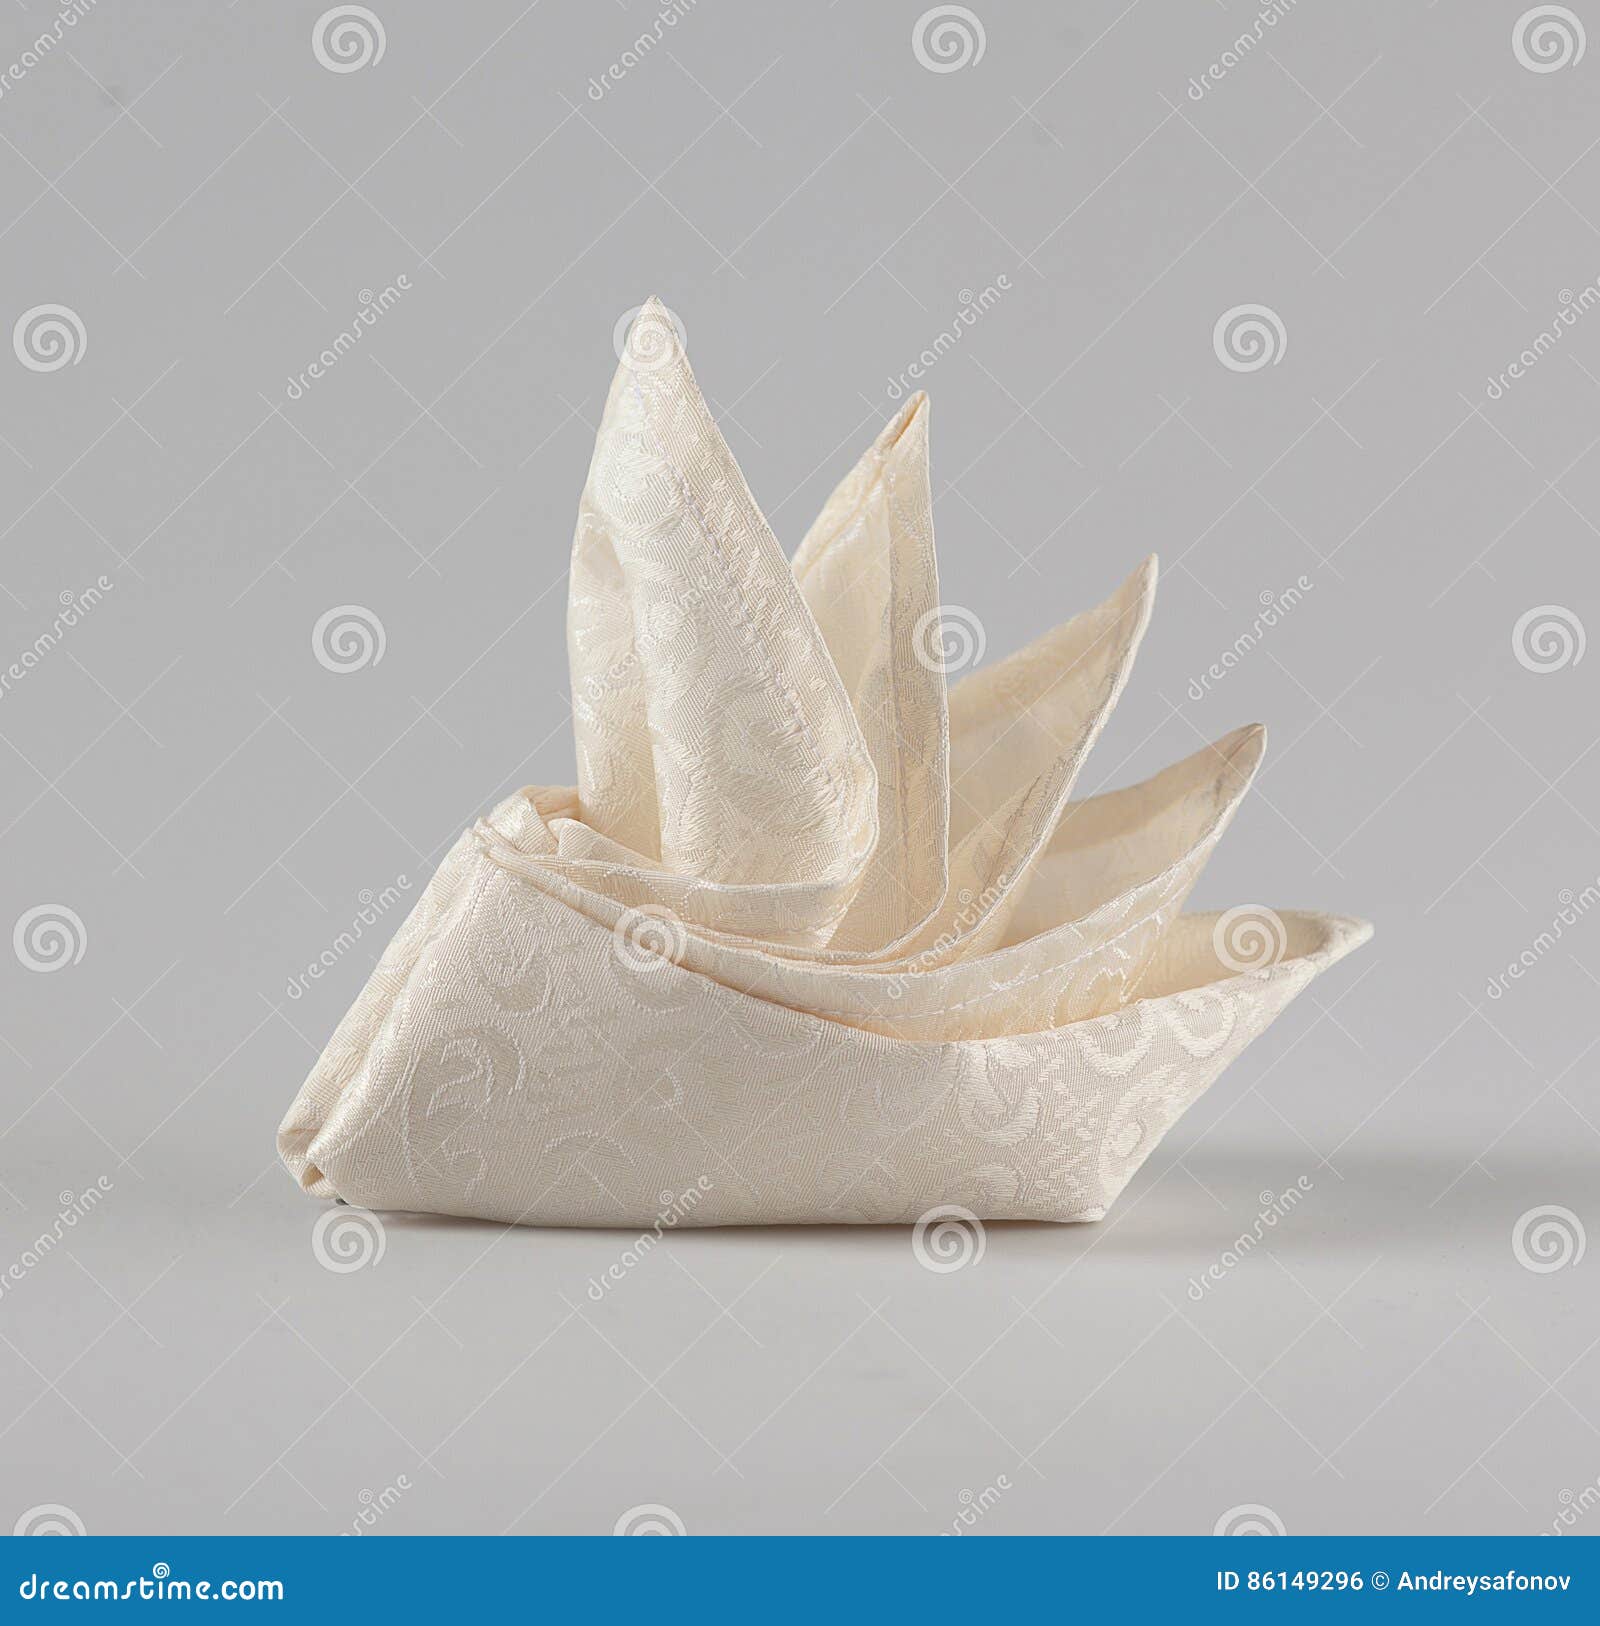 folded napkins of cloth for banquets and restaurants